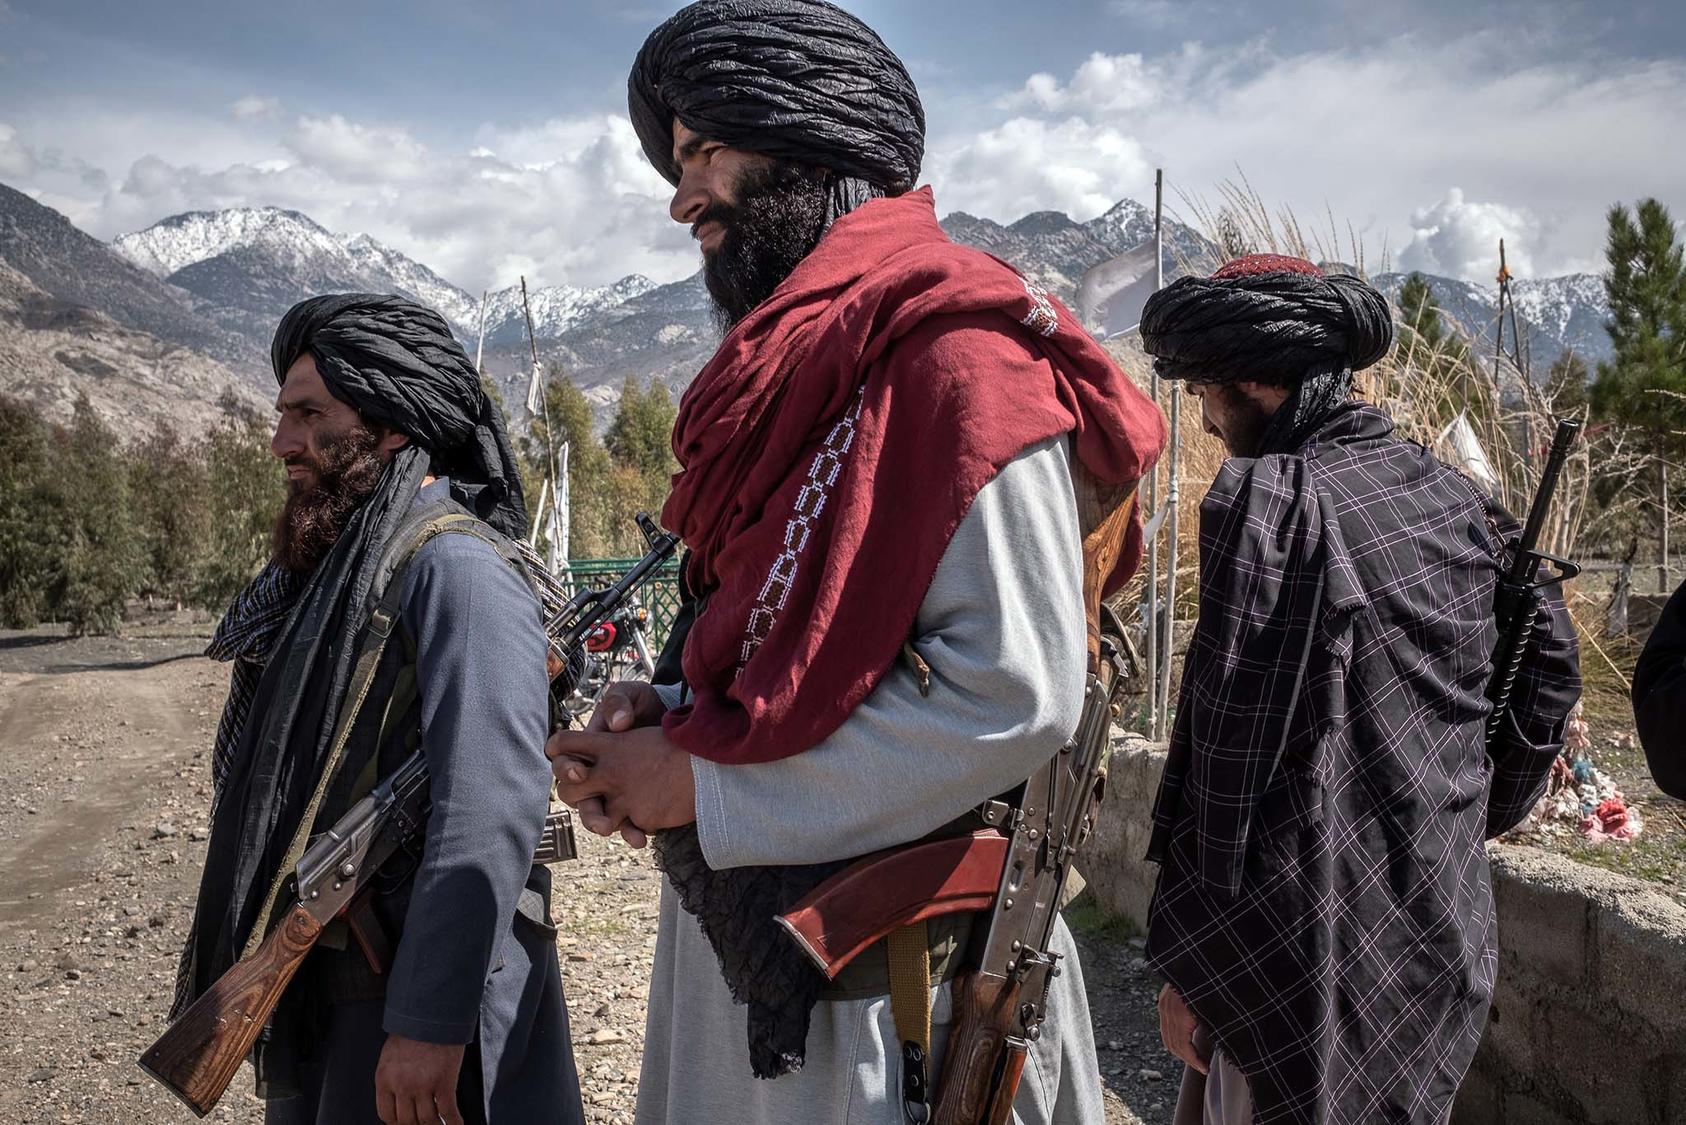 Taliban escalates violence coinciding with imminent US withdrawal